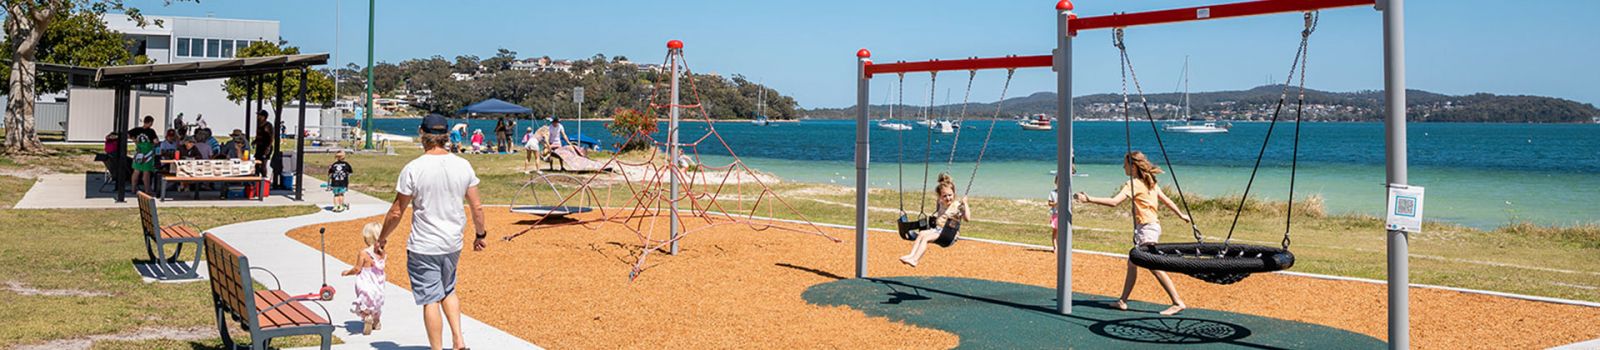 Image of a playground over looking a beach and bay banner image